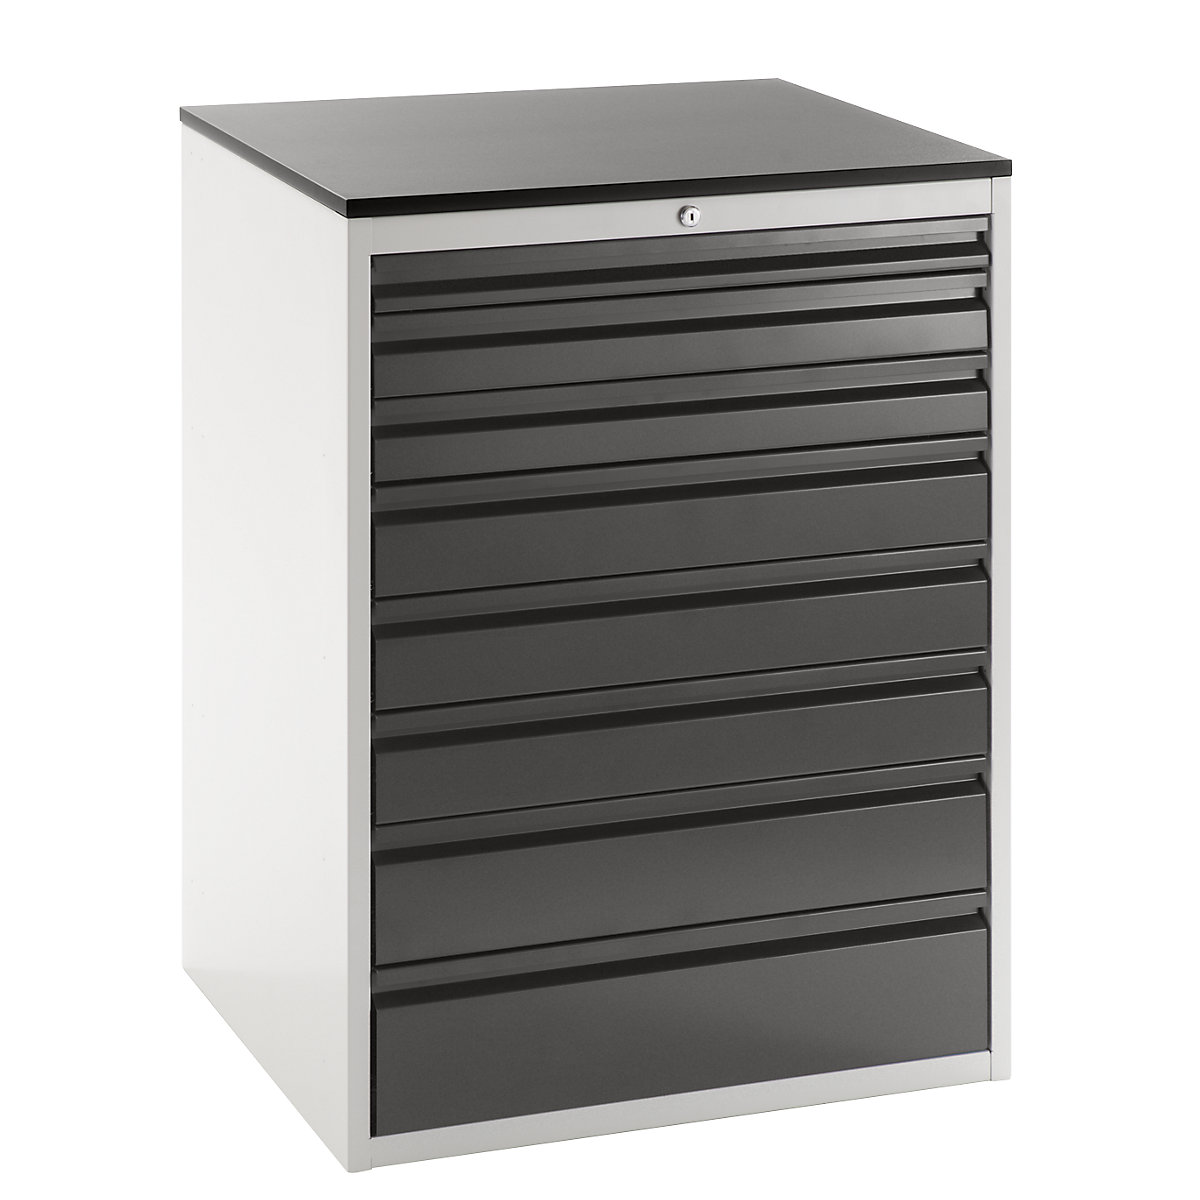 Drawer cupboard with telescopic guides – RAU, height 1030 mm, drawers: 1 x 60, 2 x 90, 3 x 120, 1 x 150, 1 x 180 mm, light grey / charcoal, width 770 mm-1